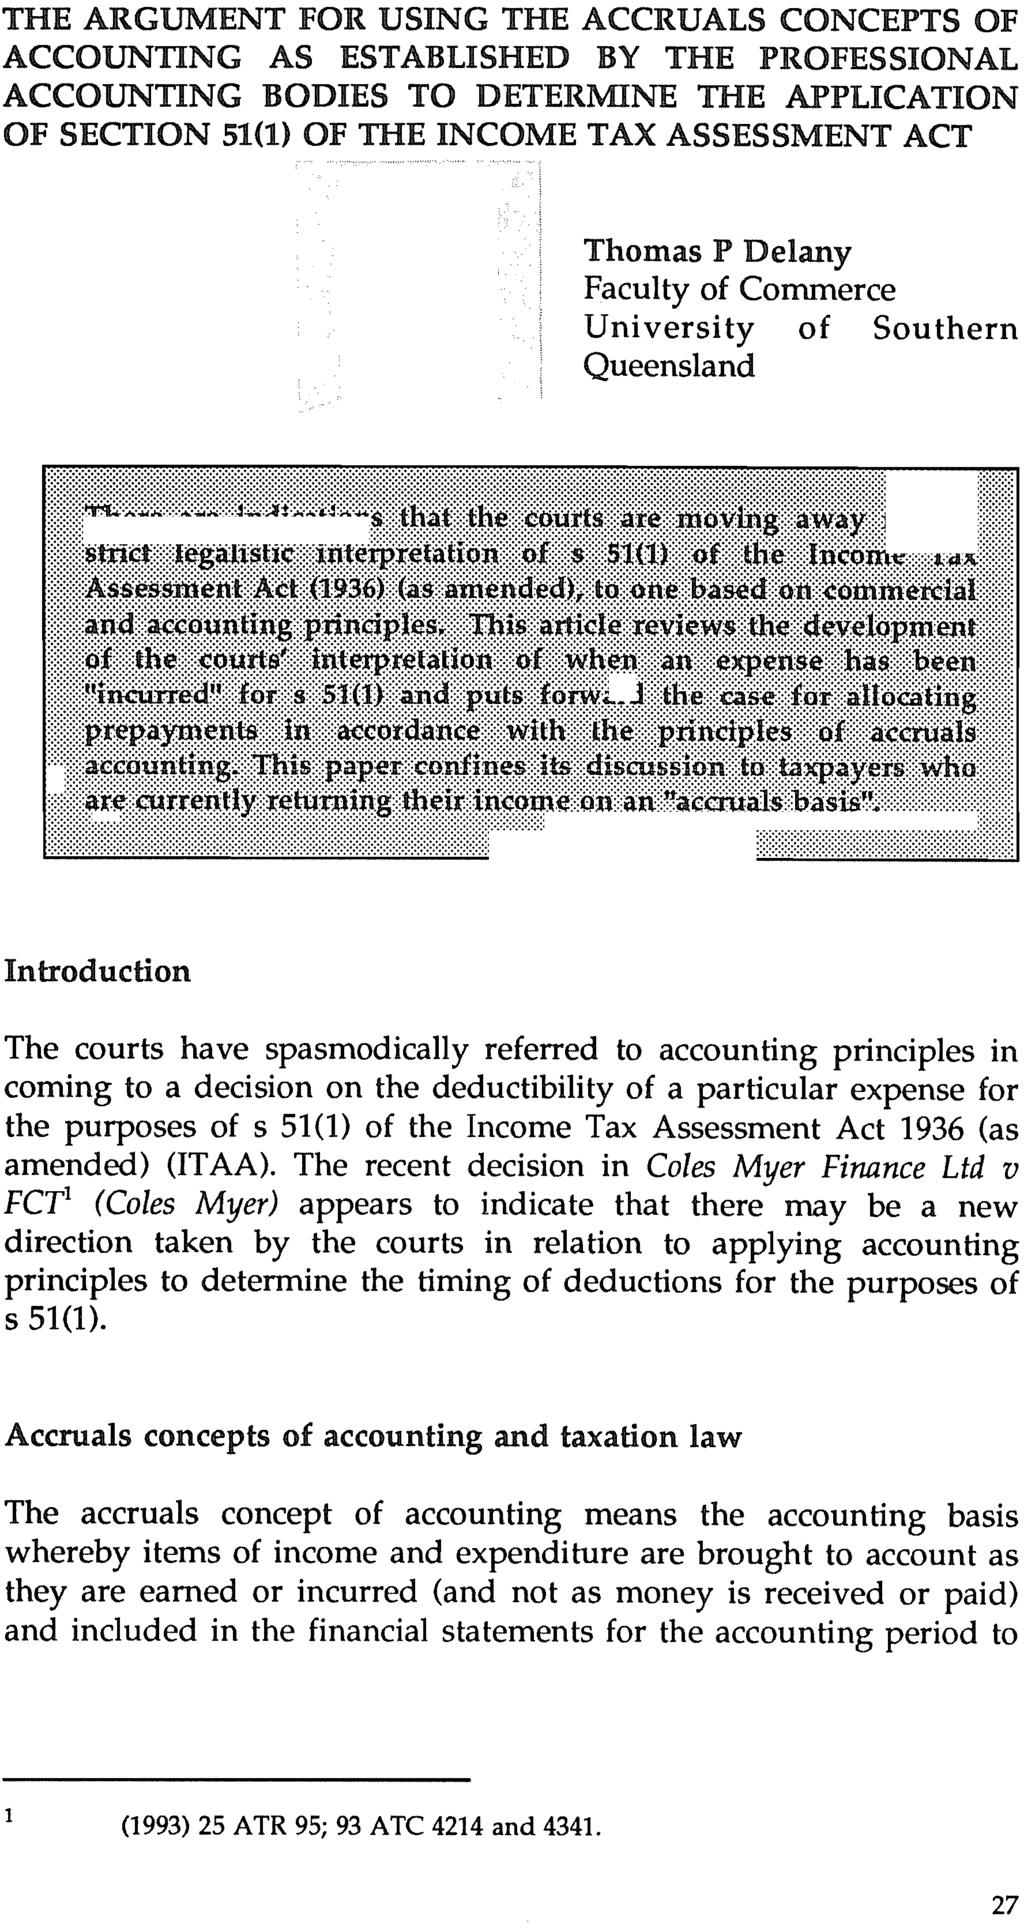 Delaney: Accruals Accounting and s 51(1) THE ARGUMENT FOR USING THE ACCRUALS CONCEPTS OF ACCOUNTING AS ESTABLISHED BY THE PROFESSIONAL ACCOUNTING BODIES TO DETERMINE THE APPLICATION OF SECTION 51(1)